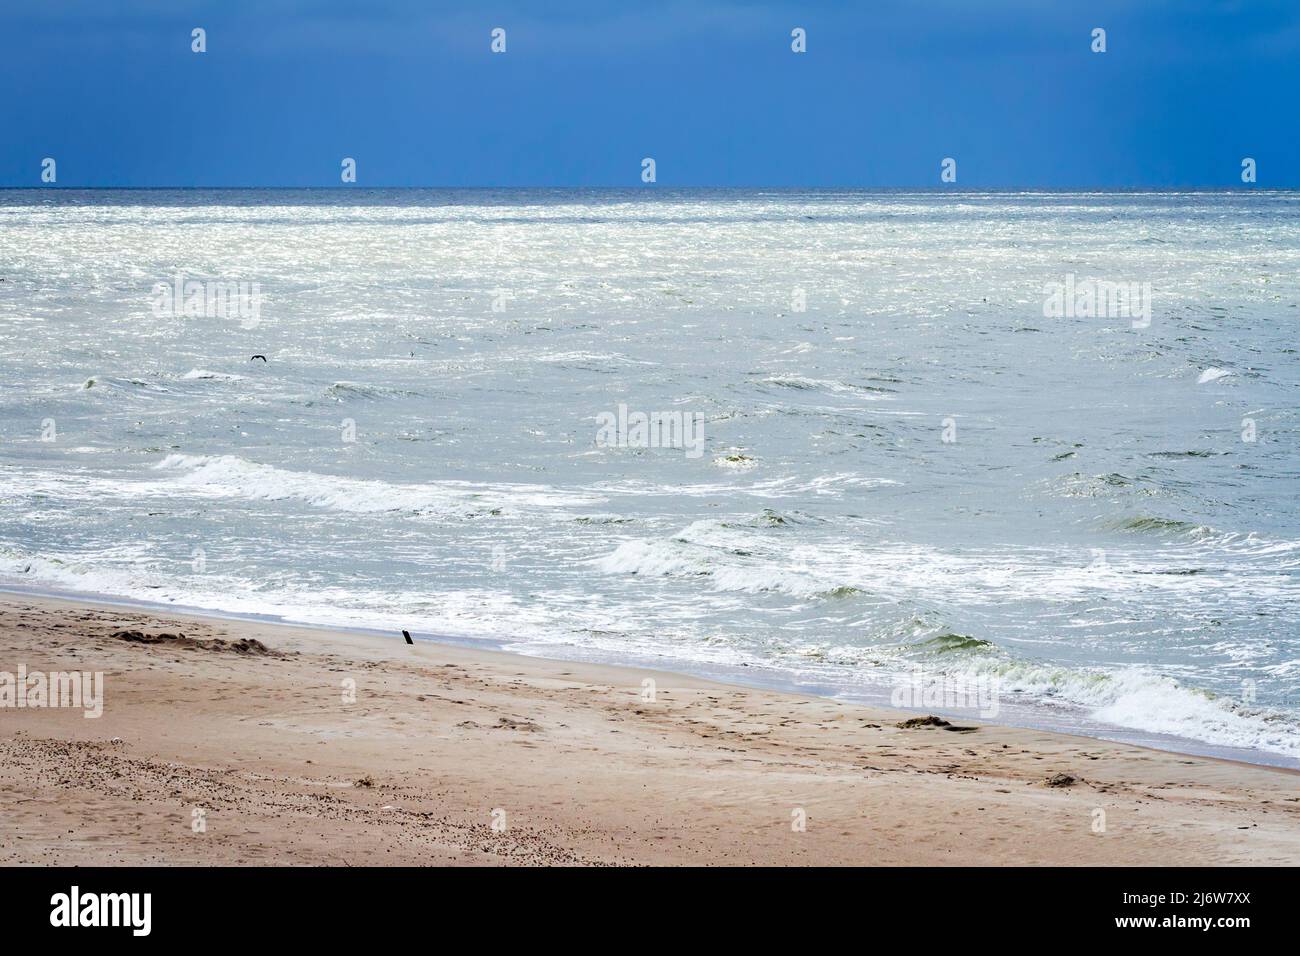 Soft waves of the sea on the sandy beach Stock Photo